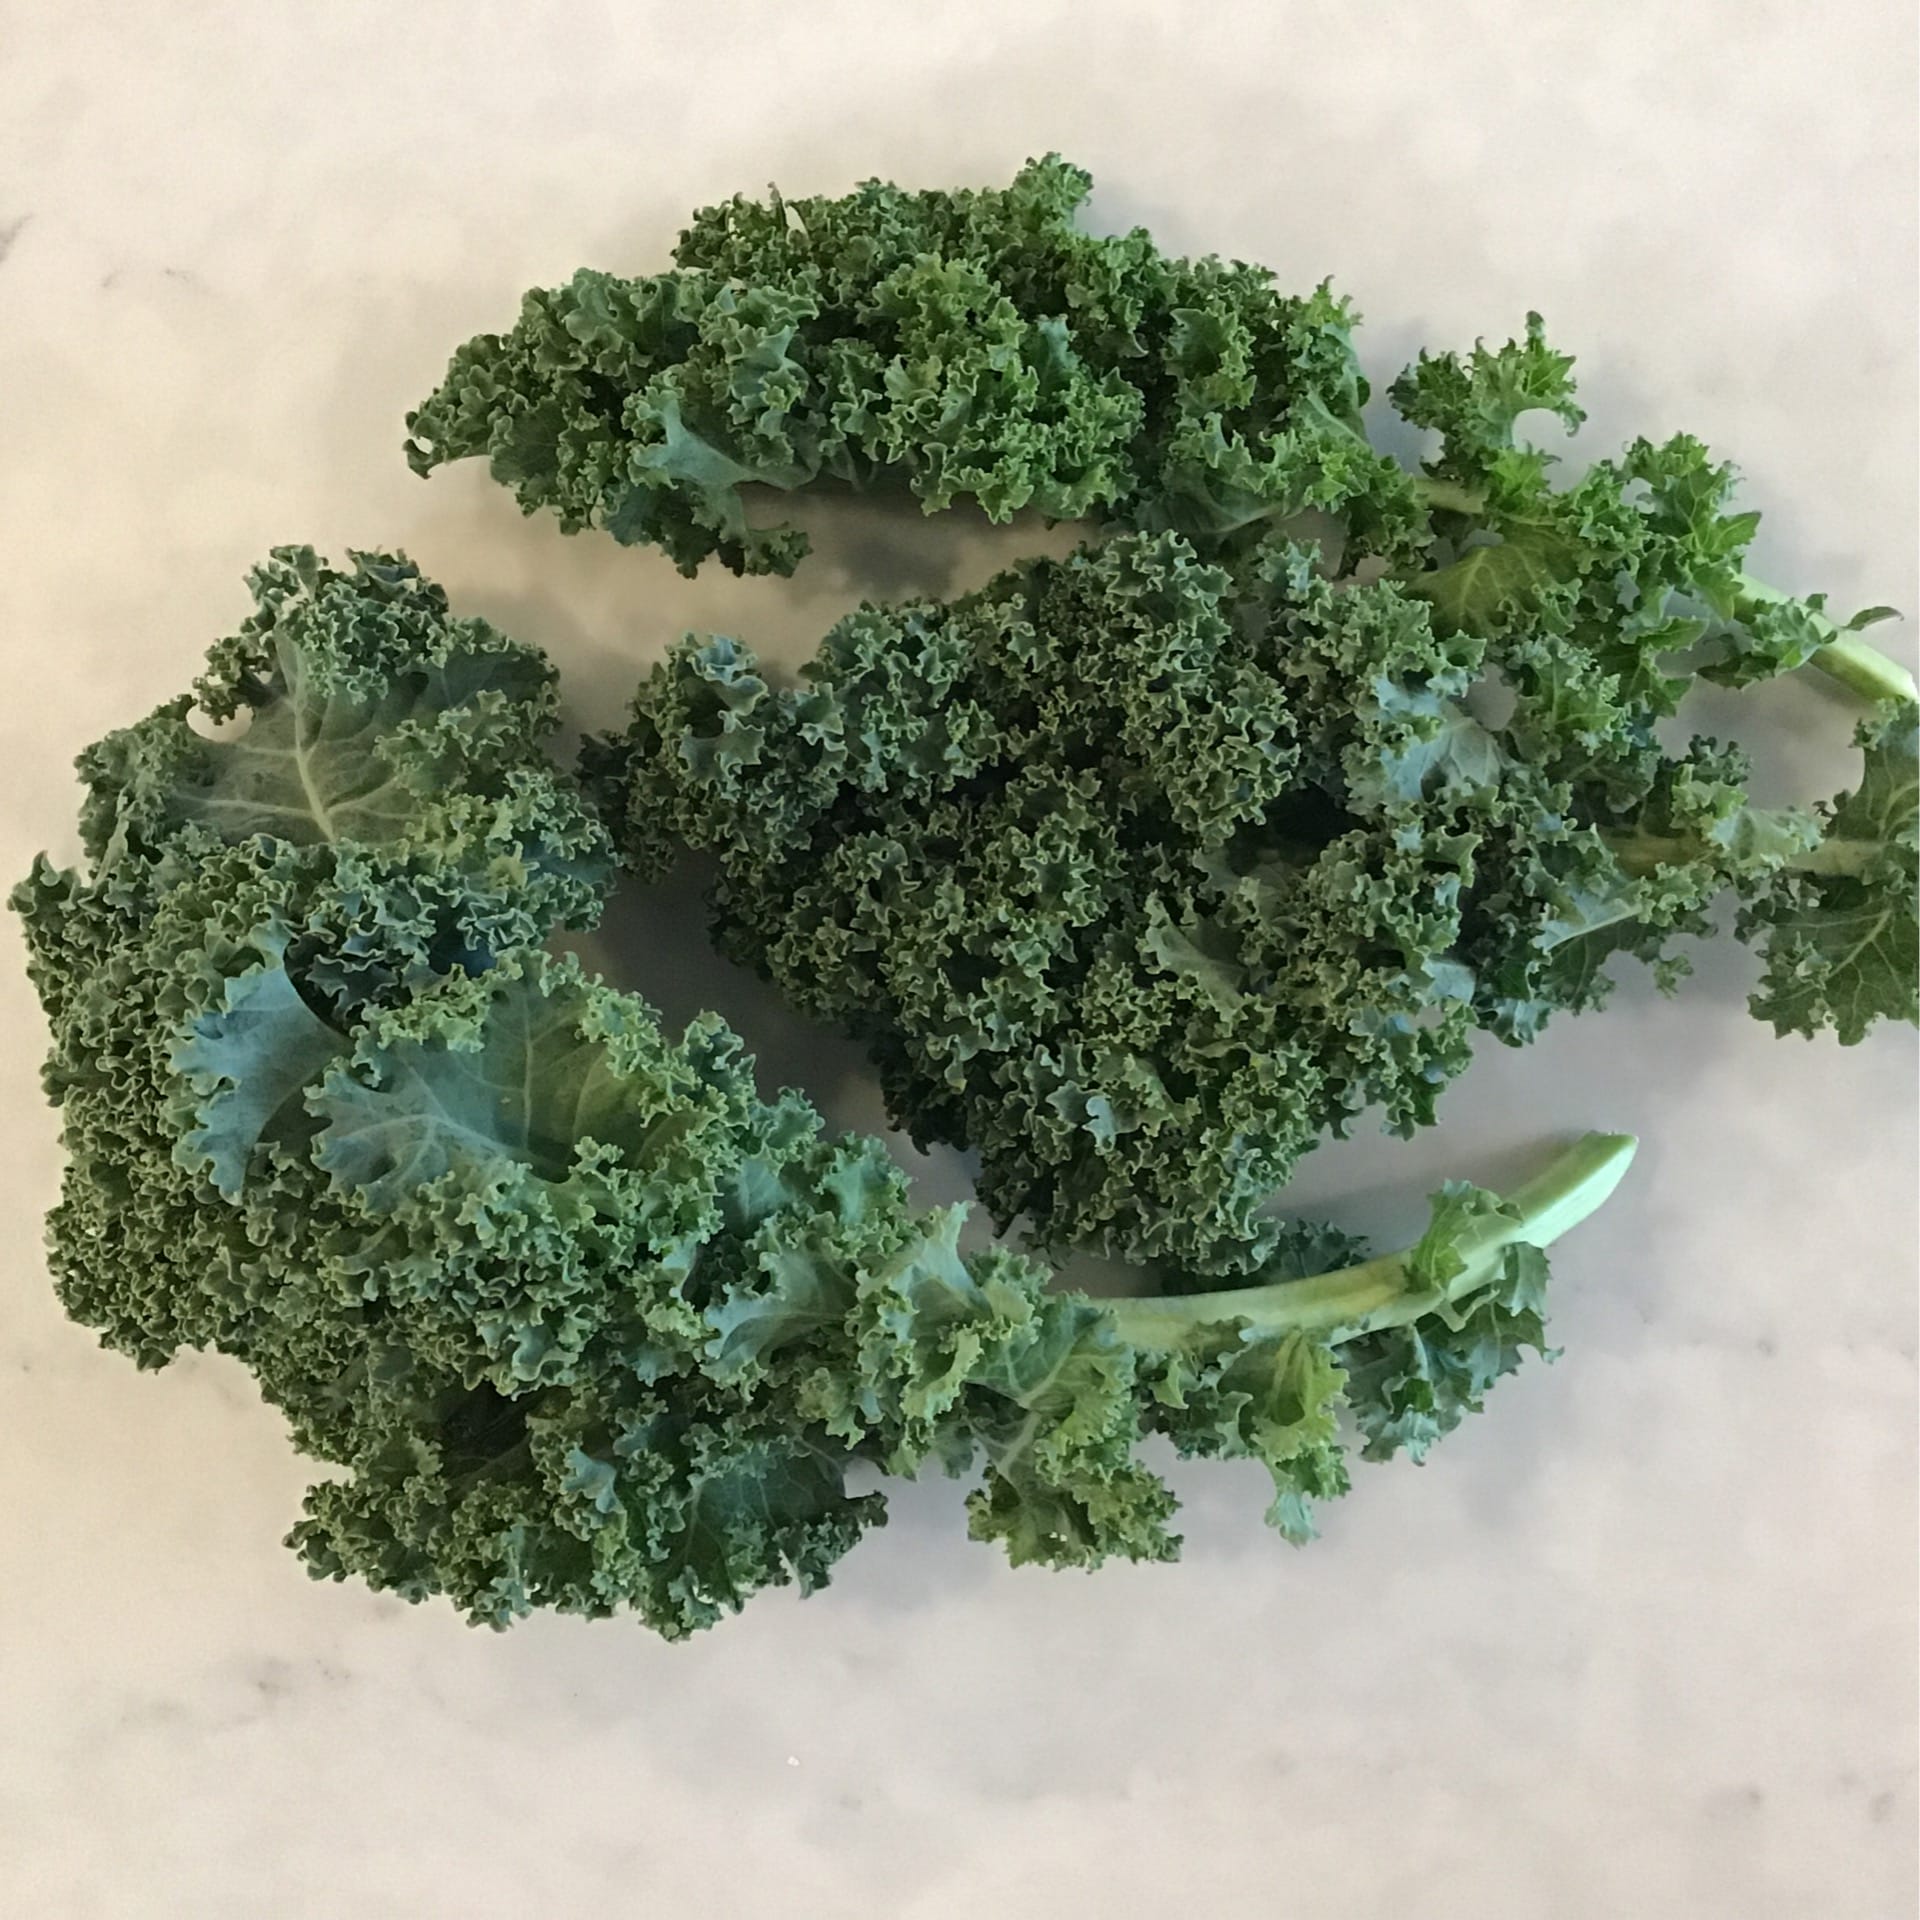 green curly kale